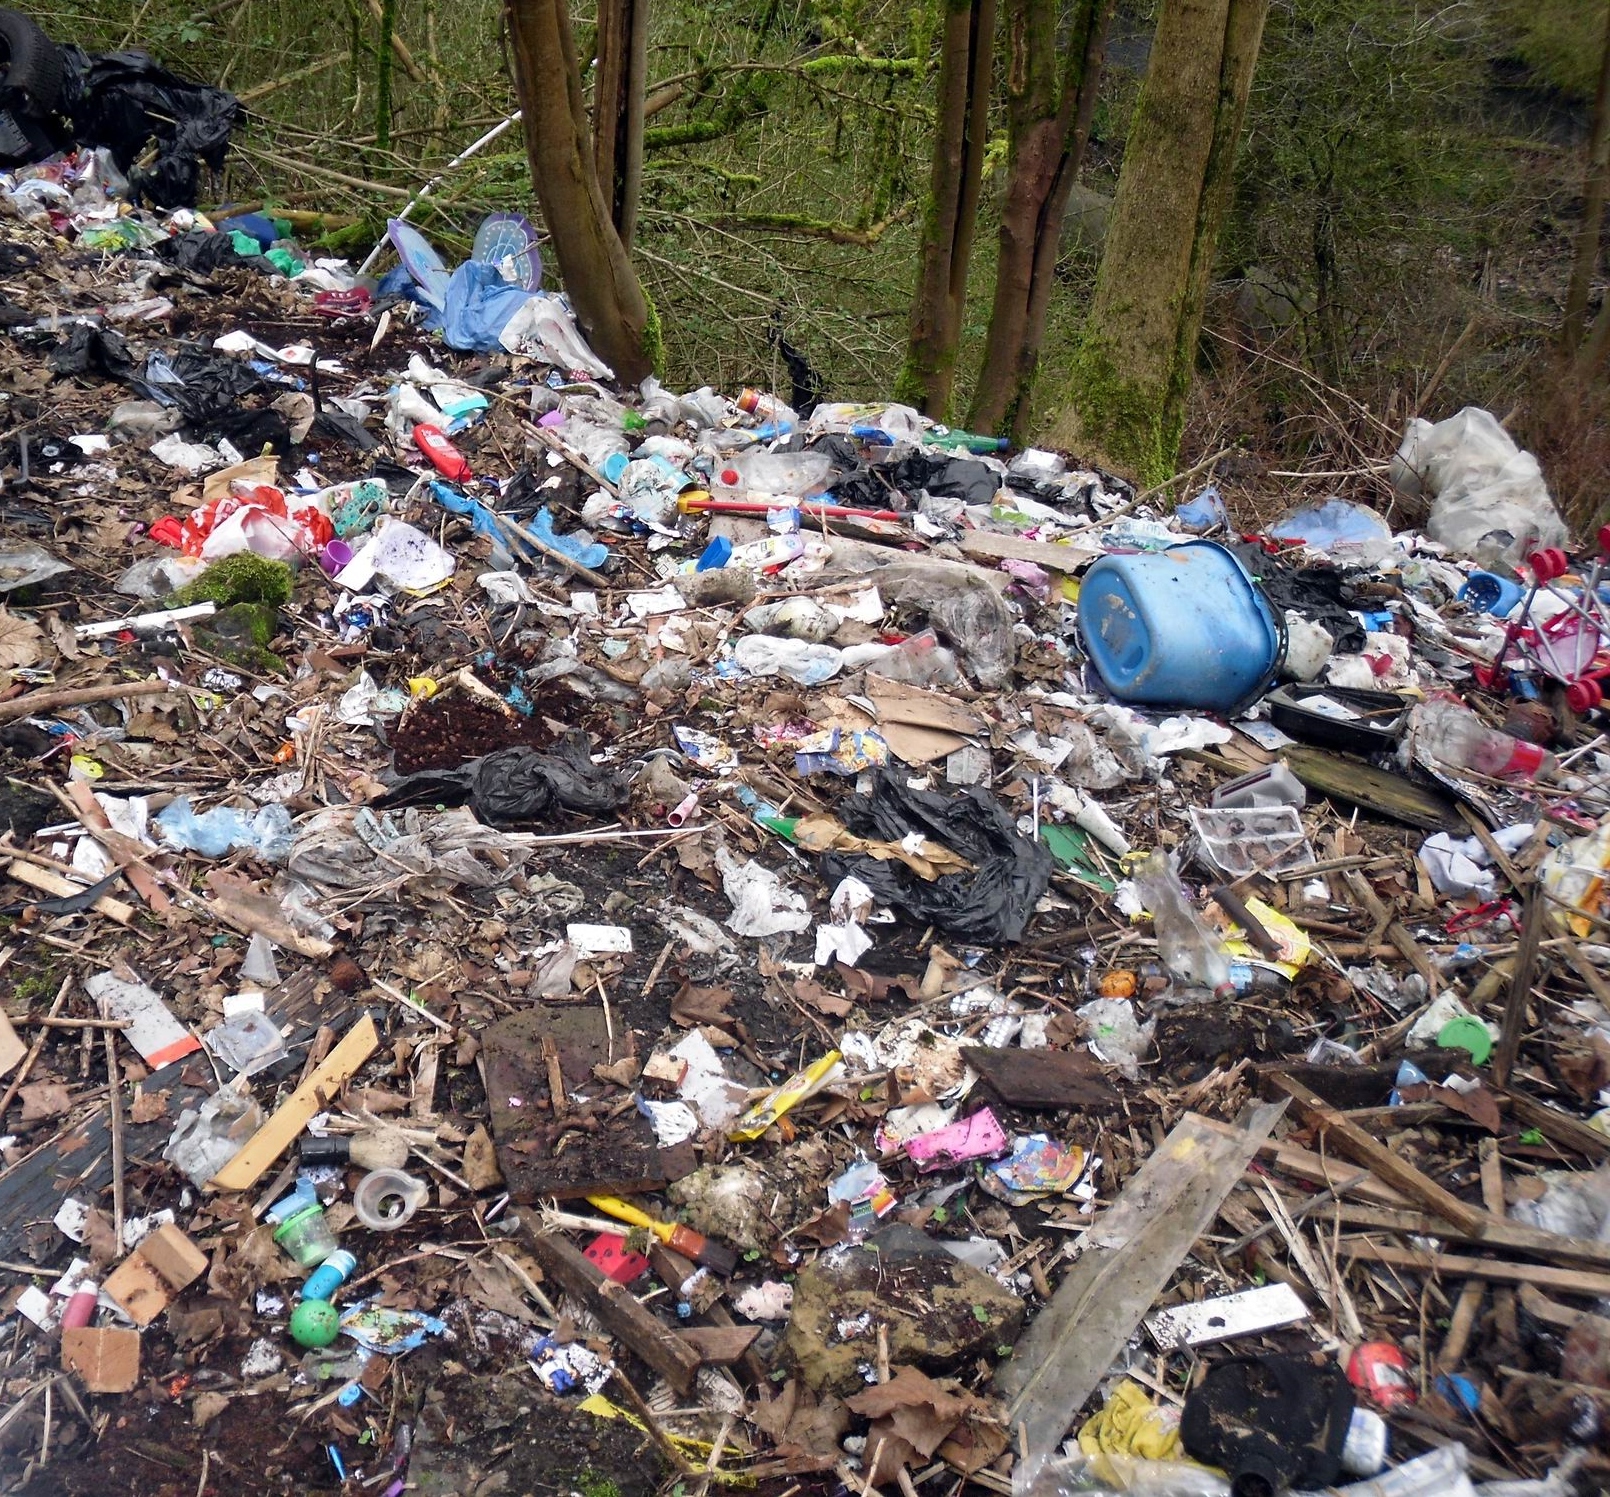 Fly-tipping in woods down to queues at nearby tip, councillor claims